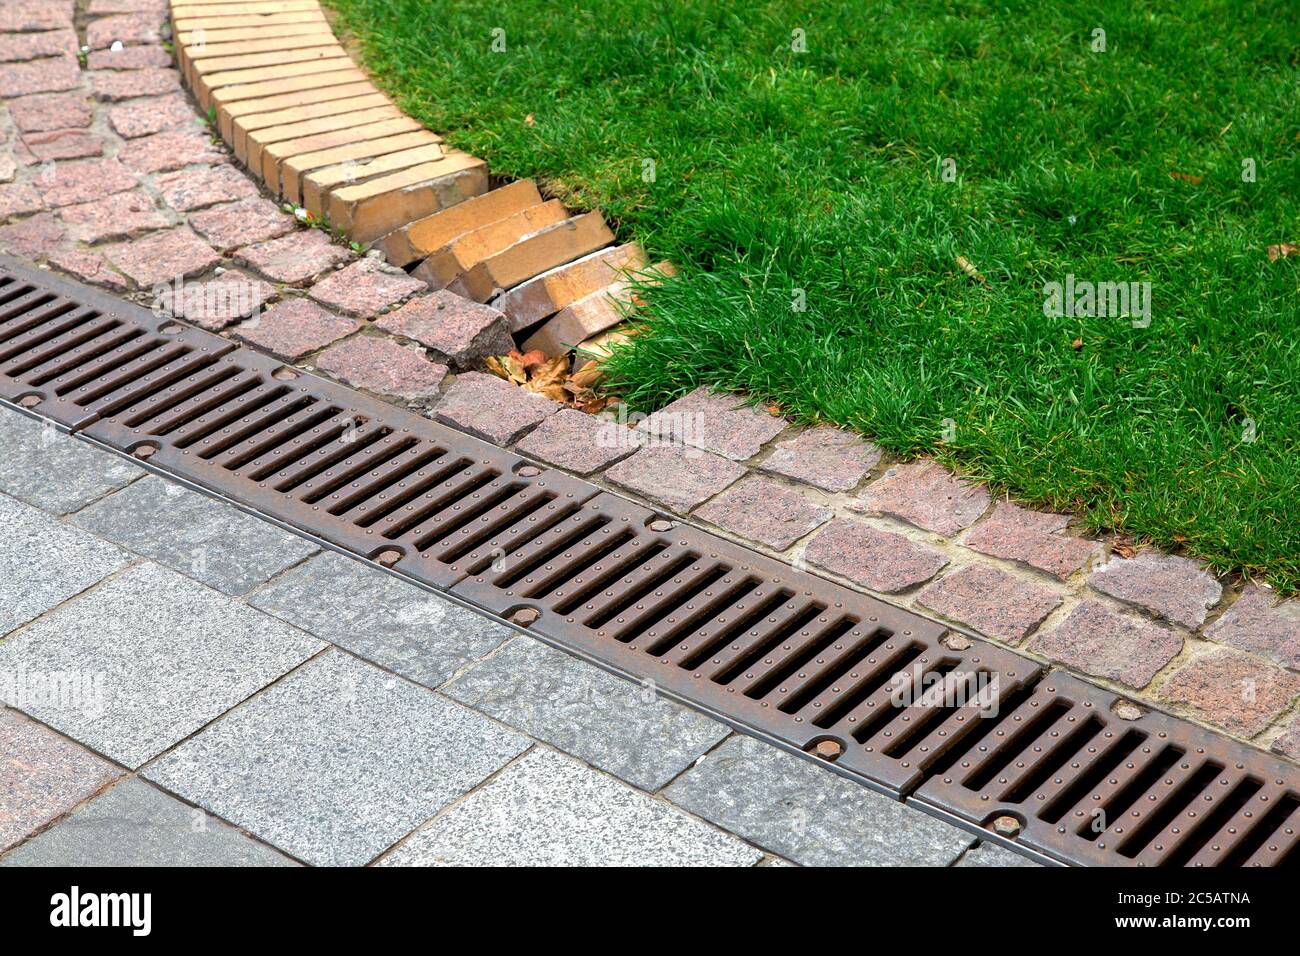 drainage grate of a storm system on a pedestrian sidewalk made of stone tiles in a park near a green lawn. Stock Photo